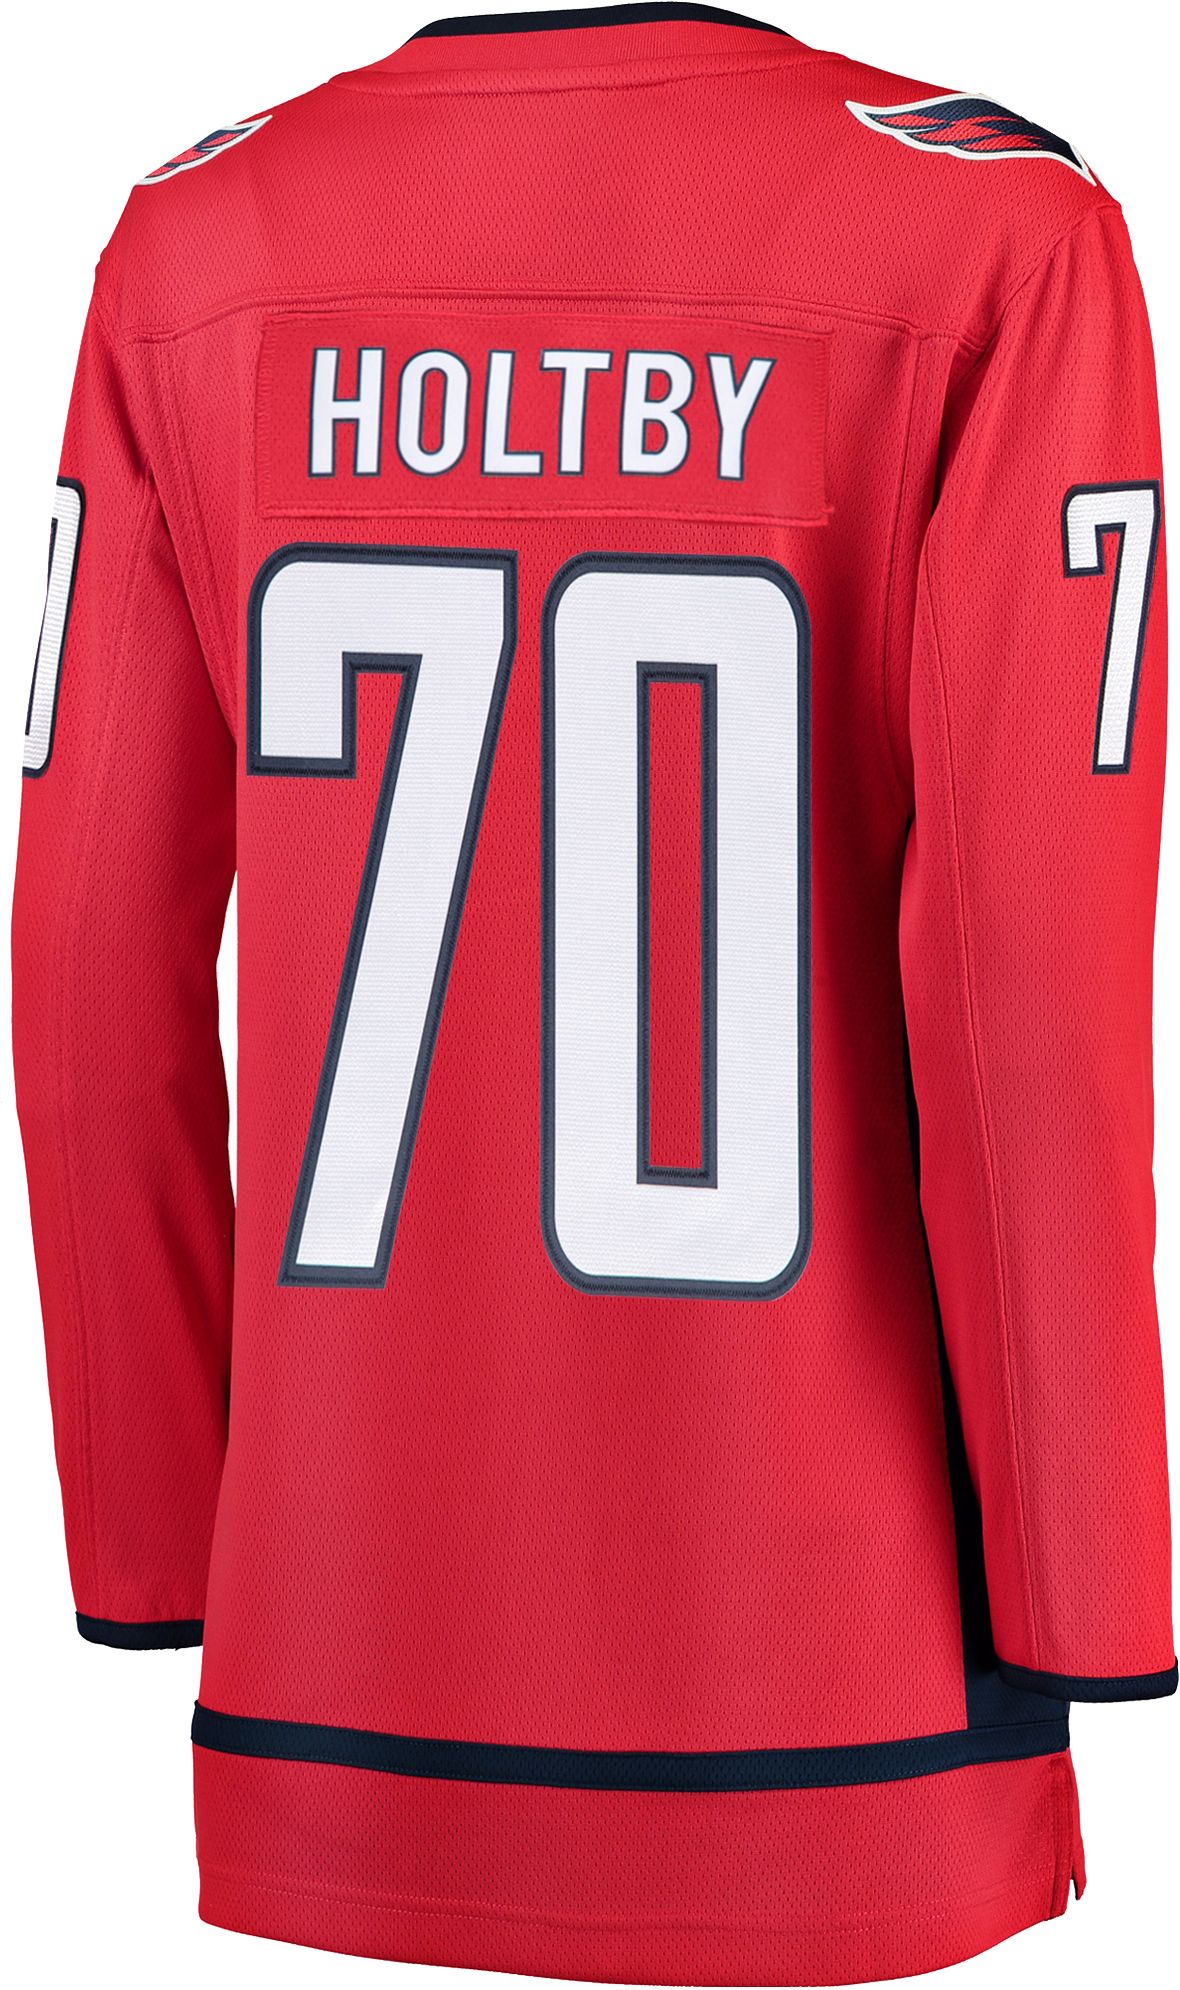 holtby womens jersey